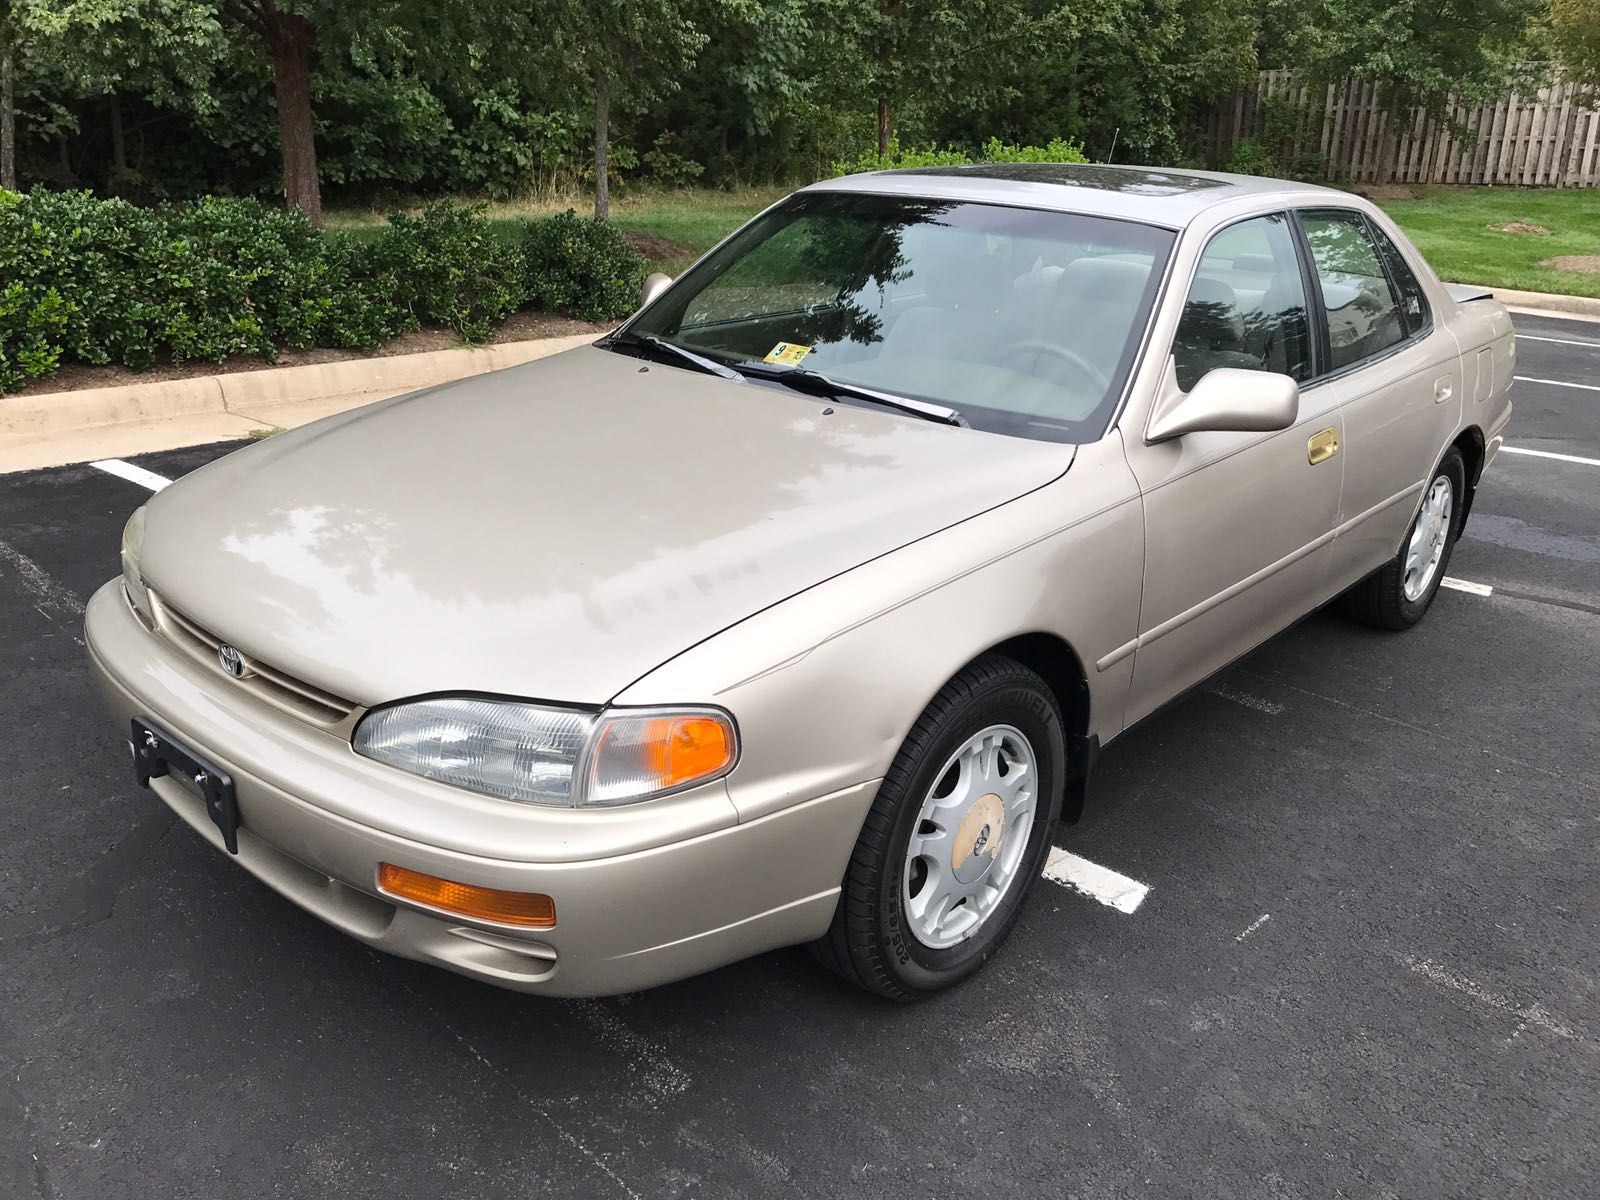 1996 Toyota Camry Le